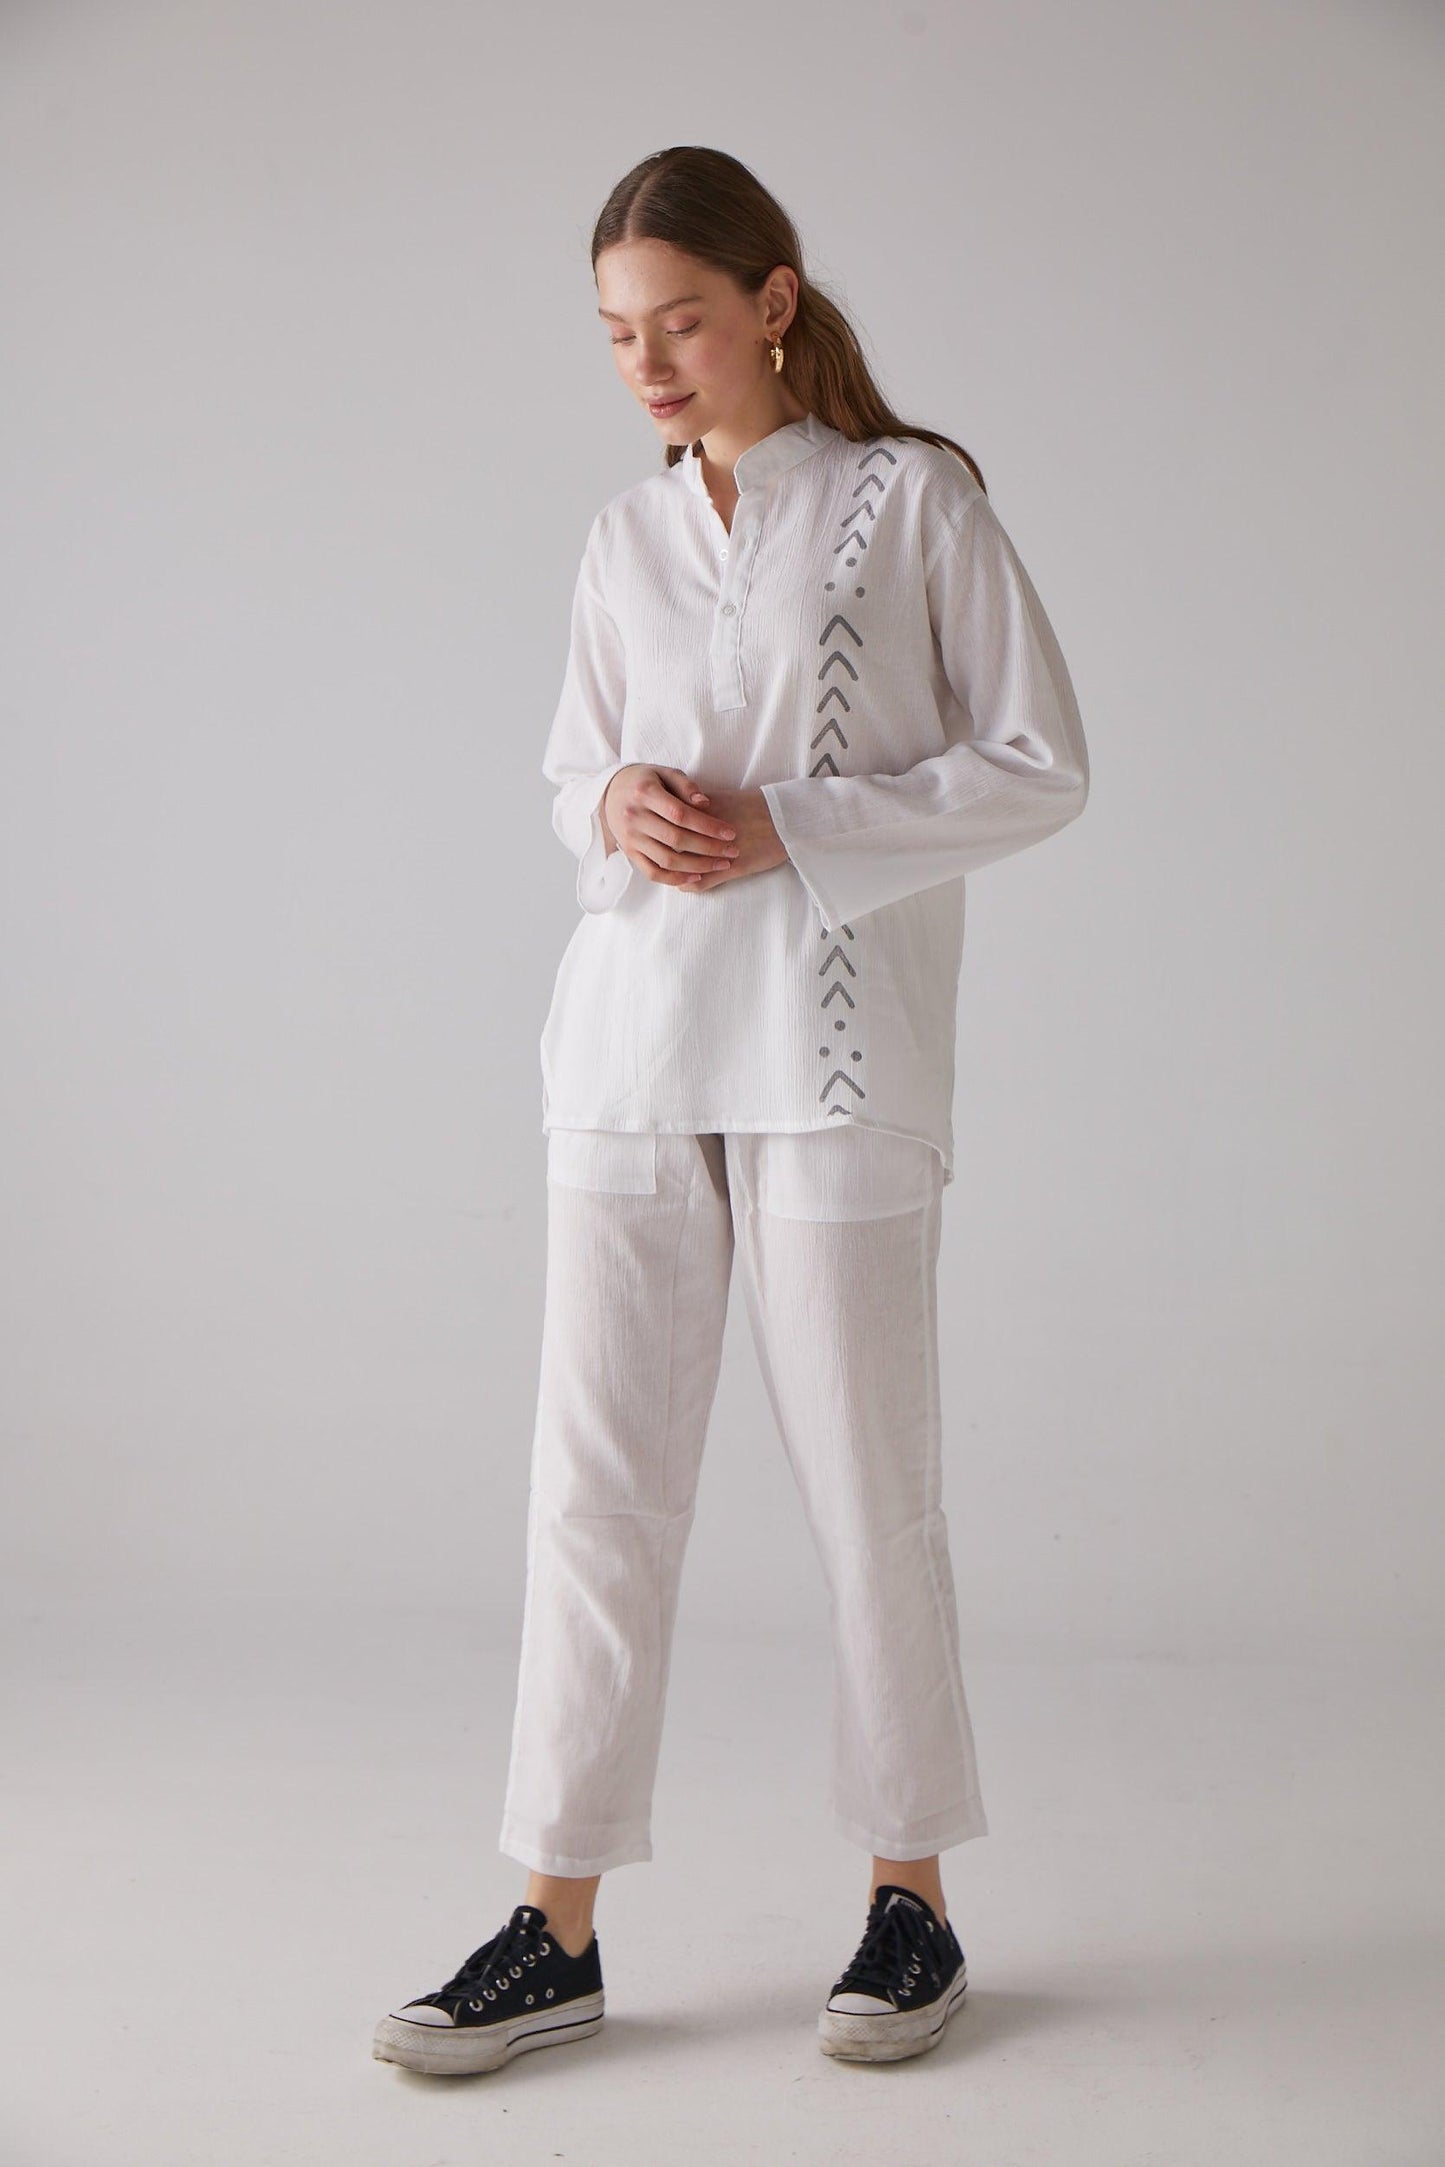 Long - Sleeve White Shirt with V Desing Pattern - 100% Organic Cotton - trendynow